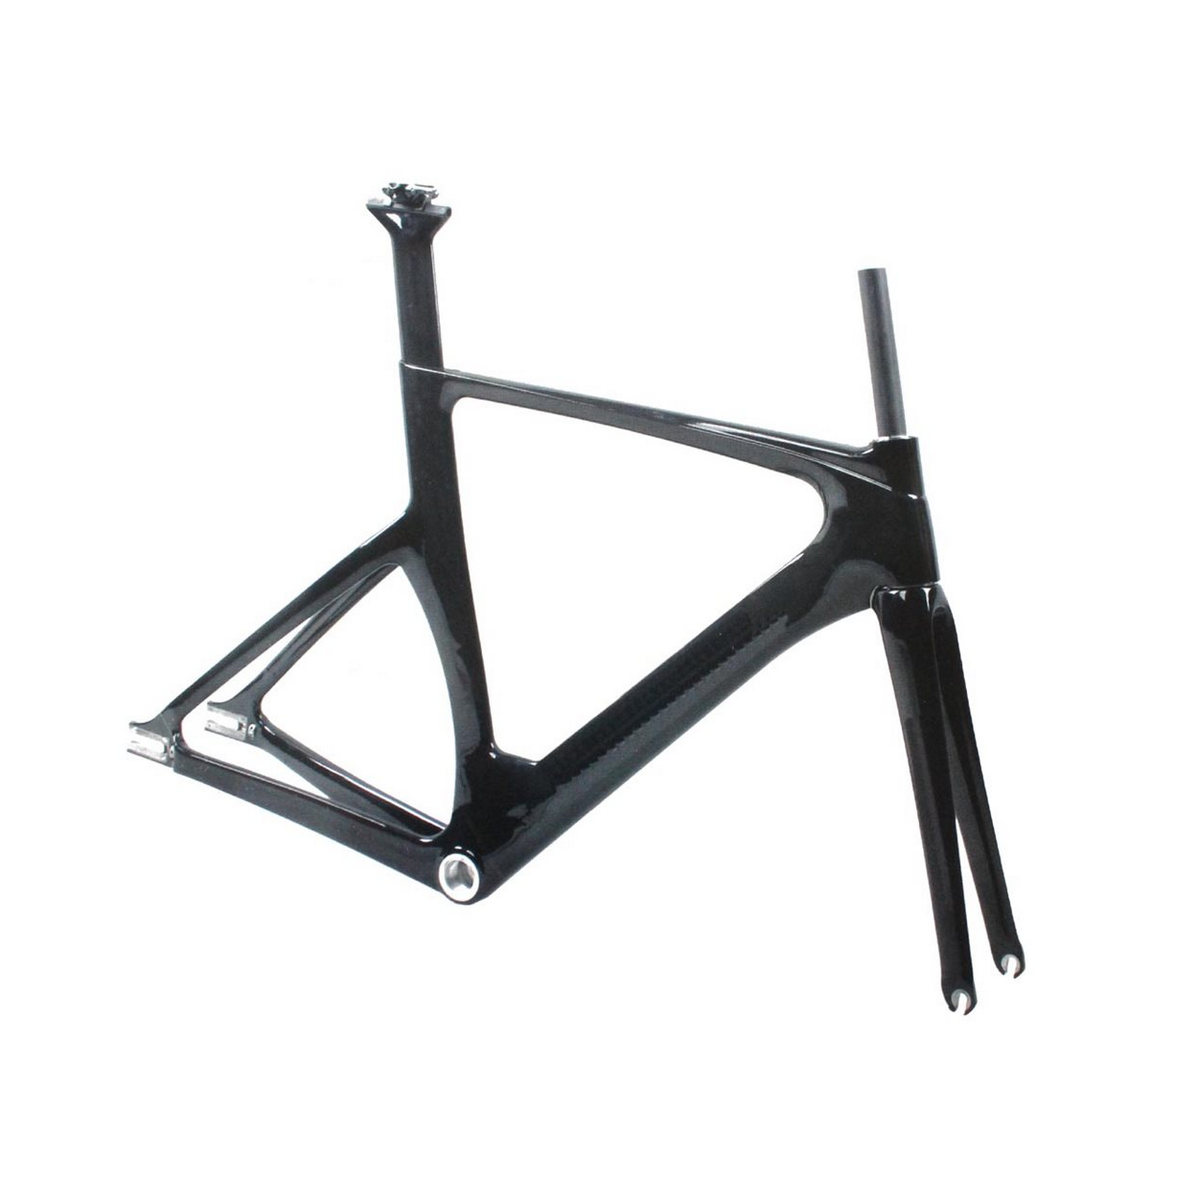 Cadre Track / Pista full carbon BSA taille 52